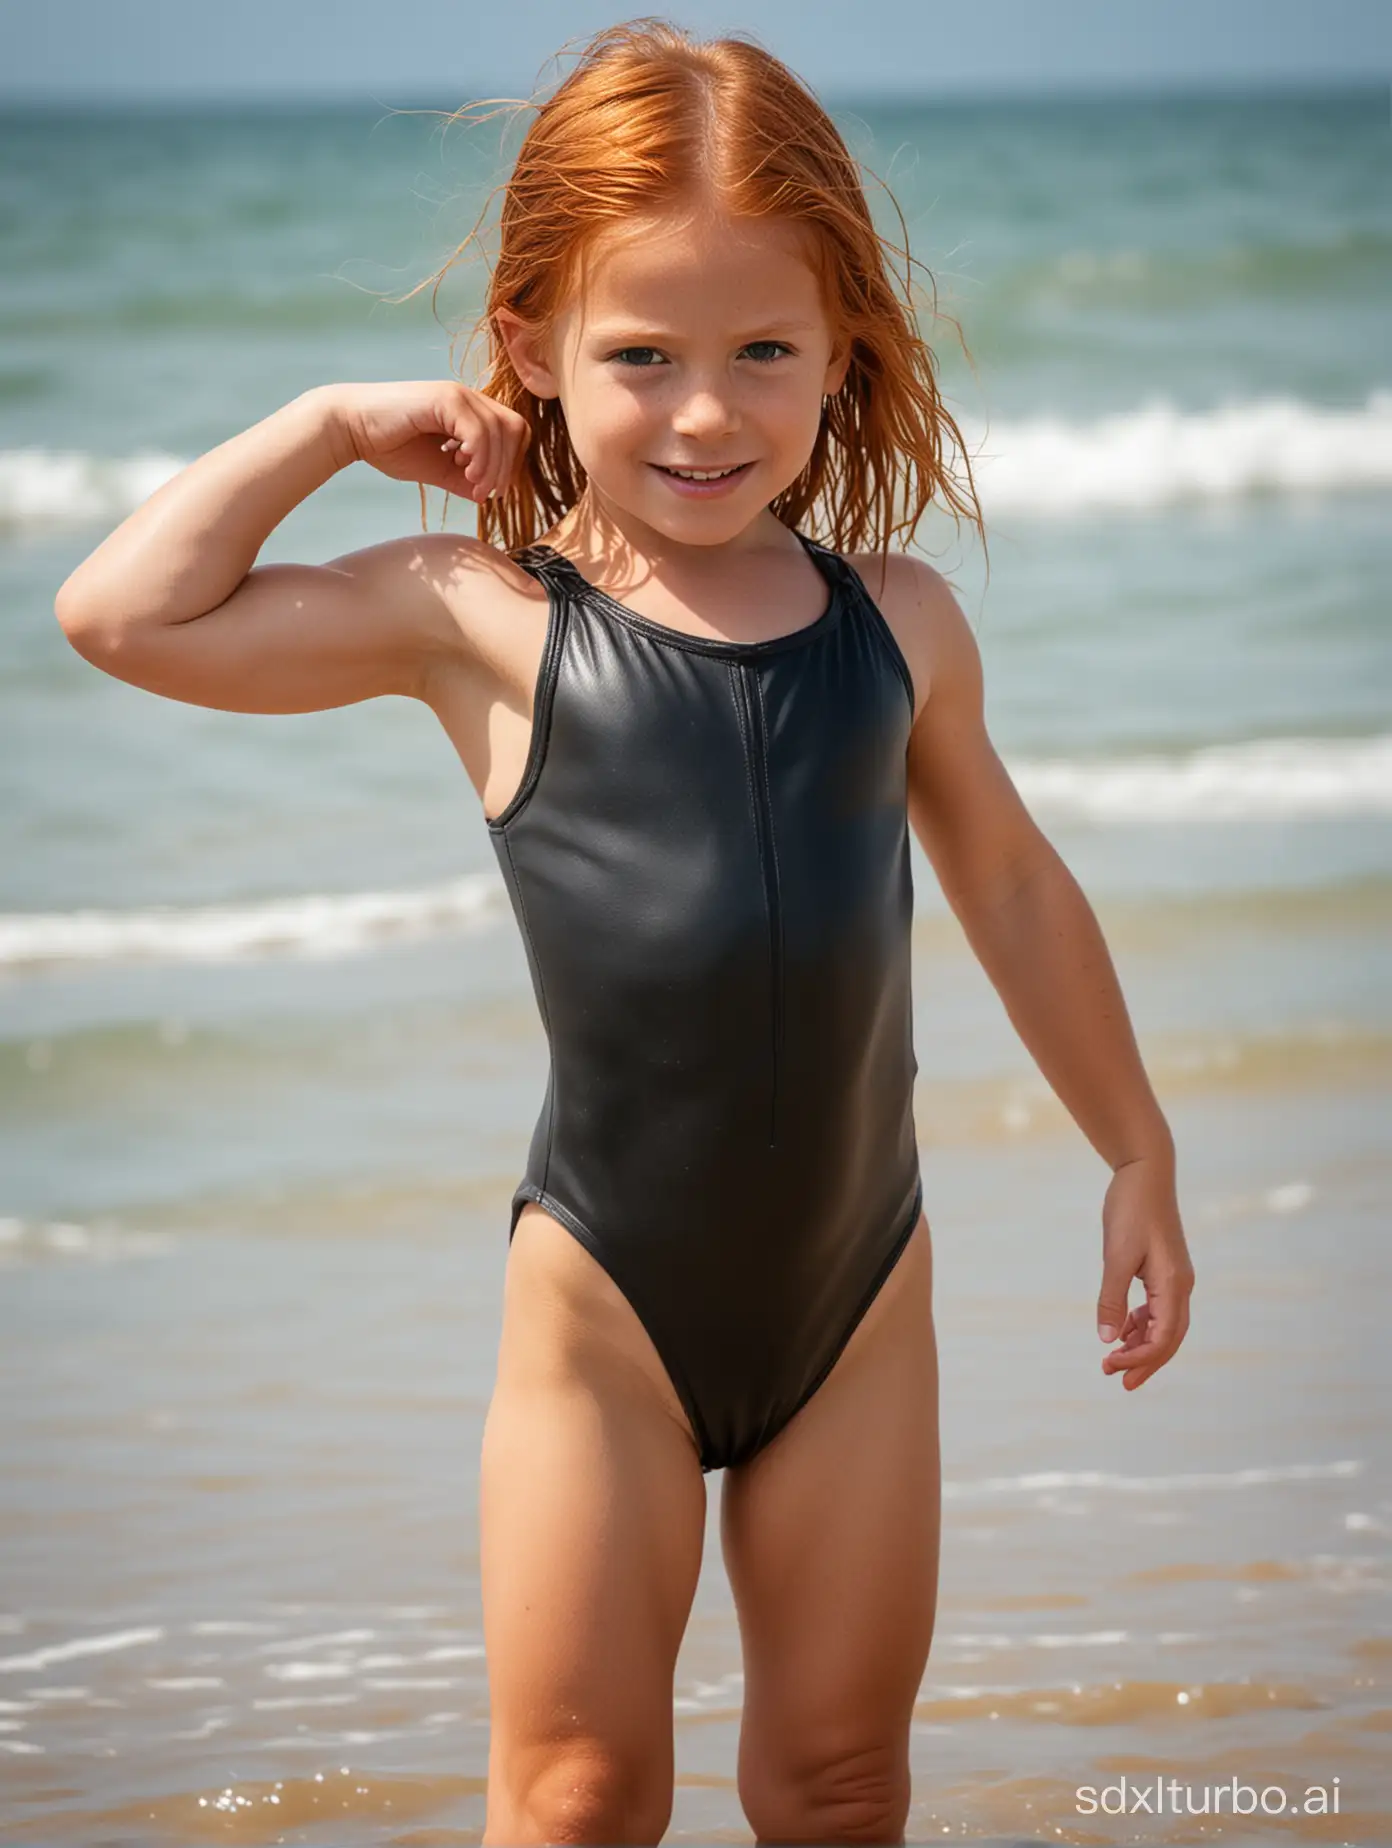 Muscular-6YearOld-GingerHaired-Girl-in-Leather-Bathing-Suit-at-Odessa-Beach